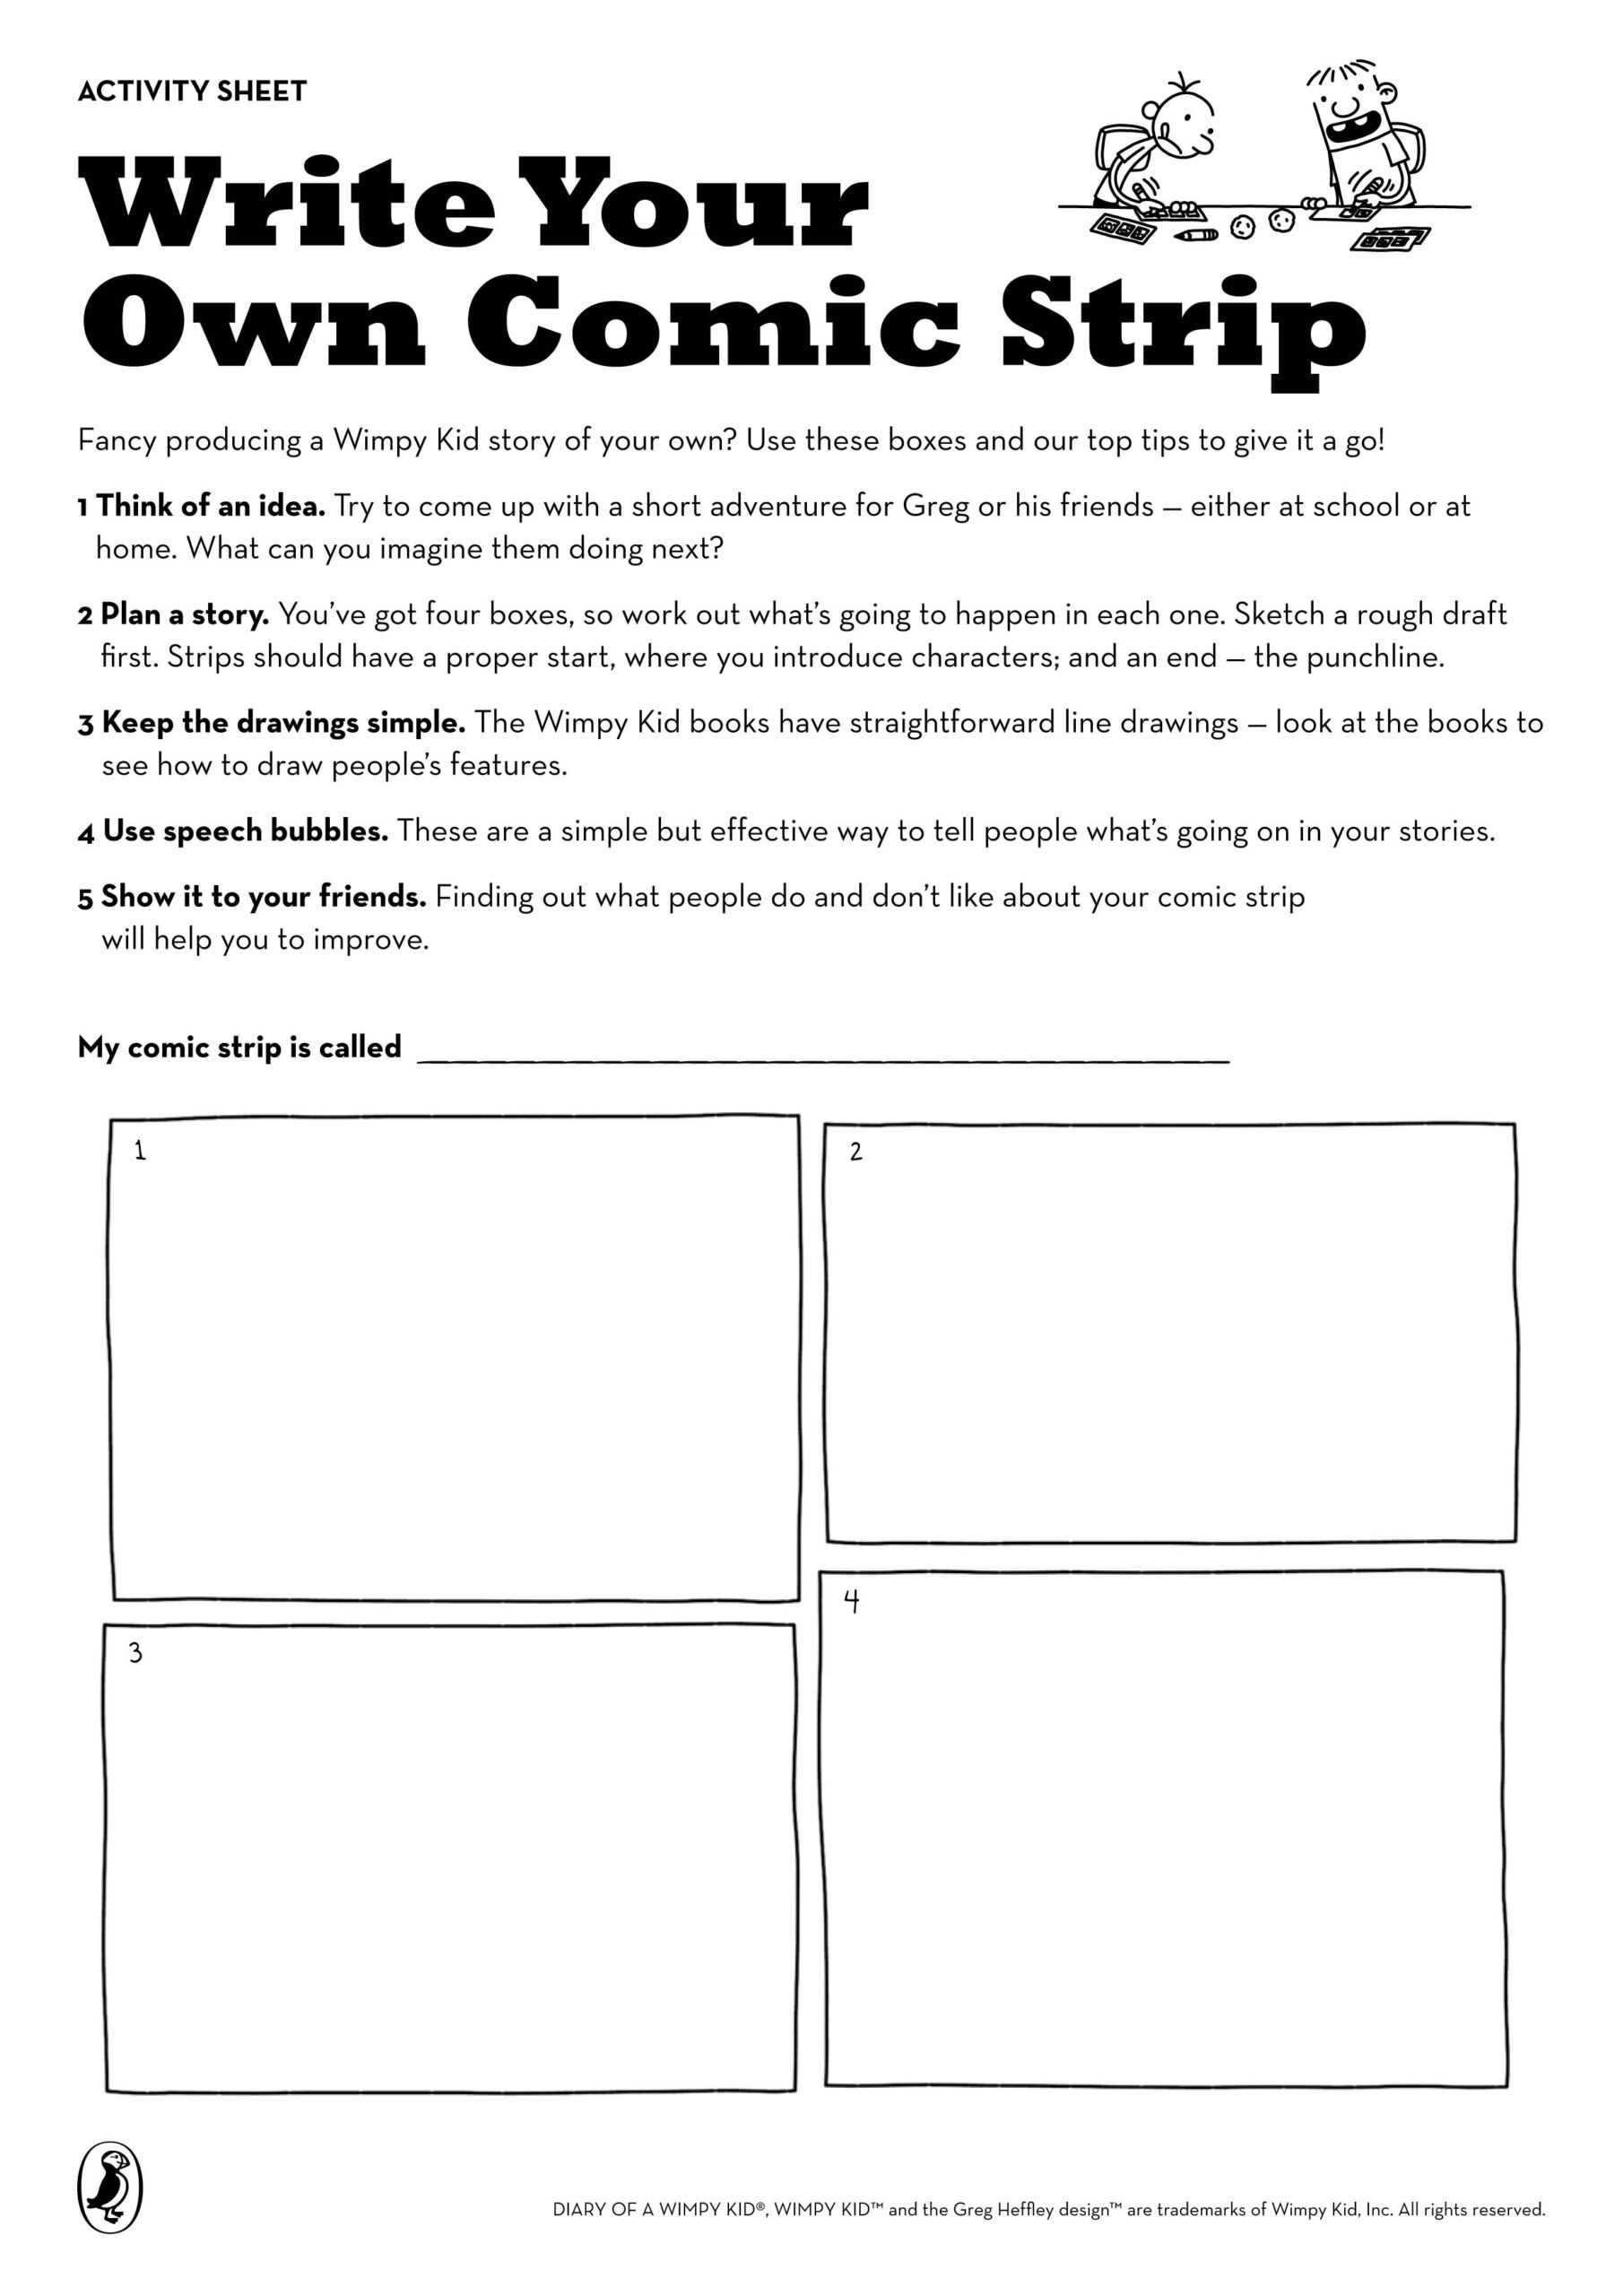 Write Your Own Wimpy Kid Comic Strip – Scholastic Kids' Club For Printable Blank Comic Strip Template For Kids